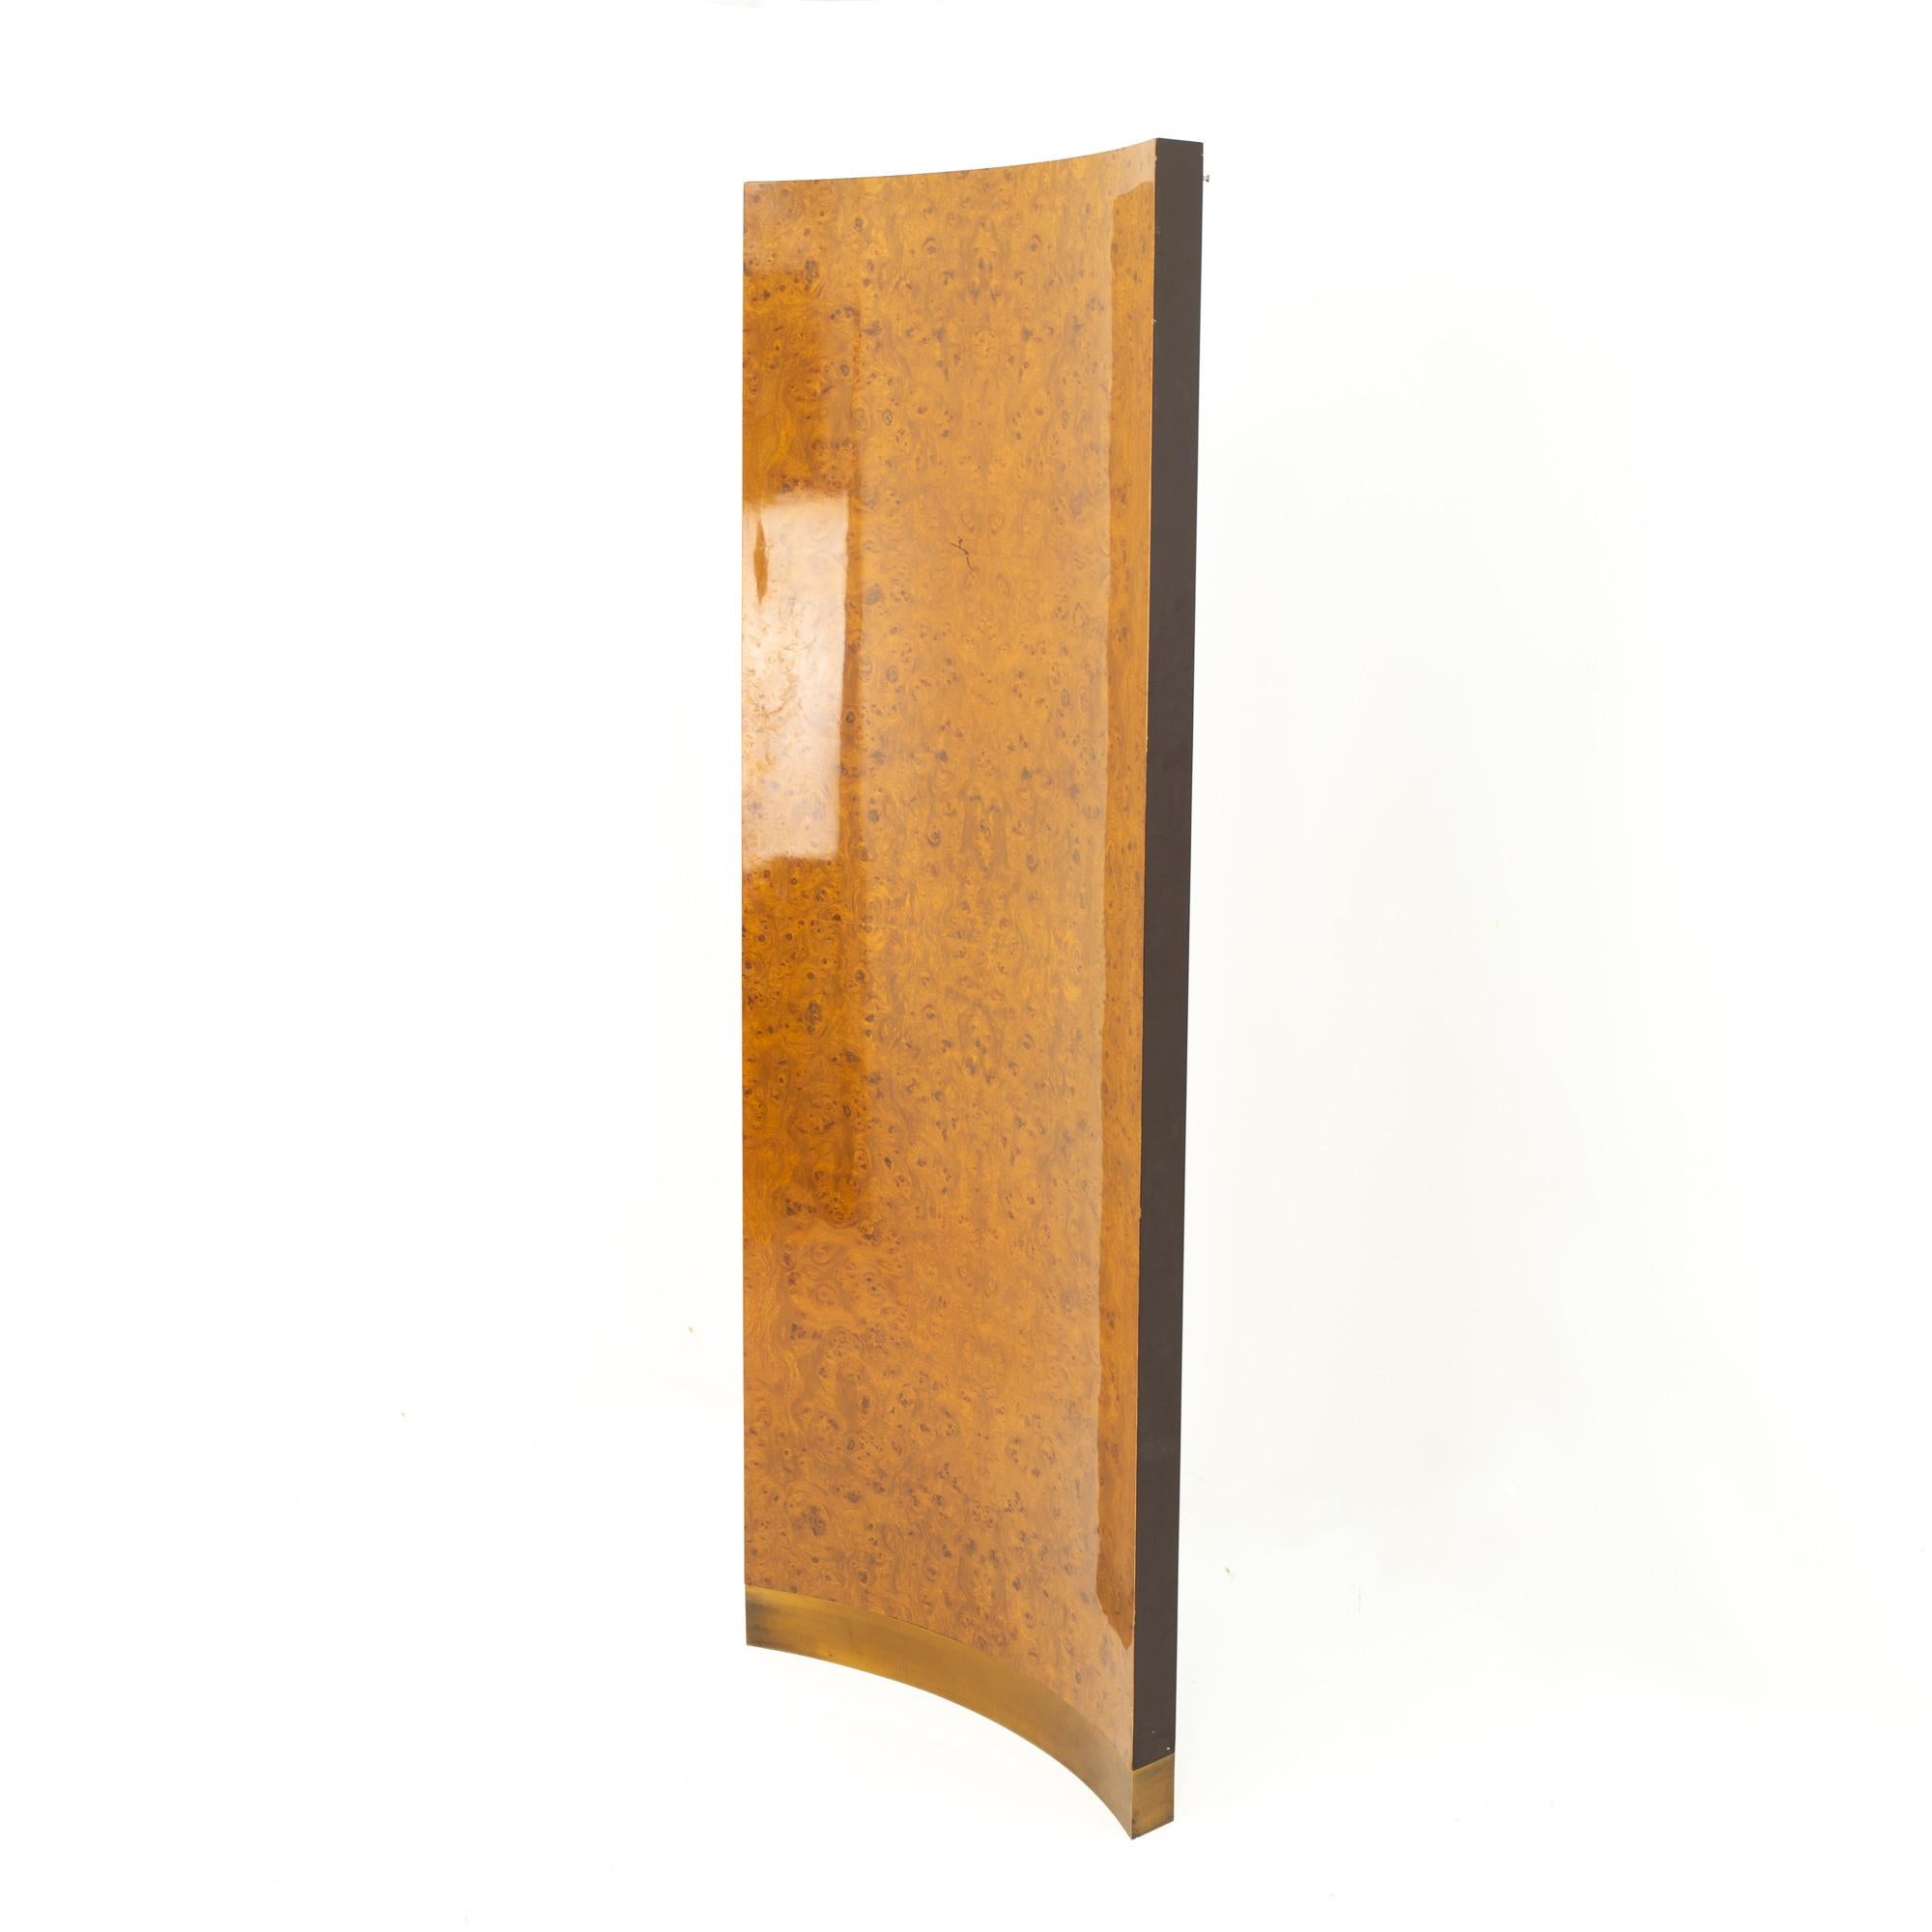 Late 20th Century Milo Baughman Style Mid Century Burl Wood Room Divider For Sale